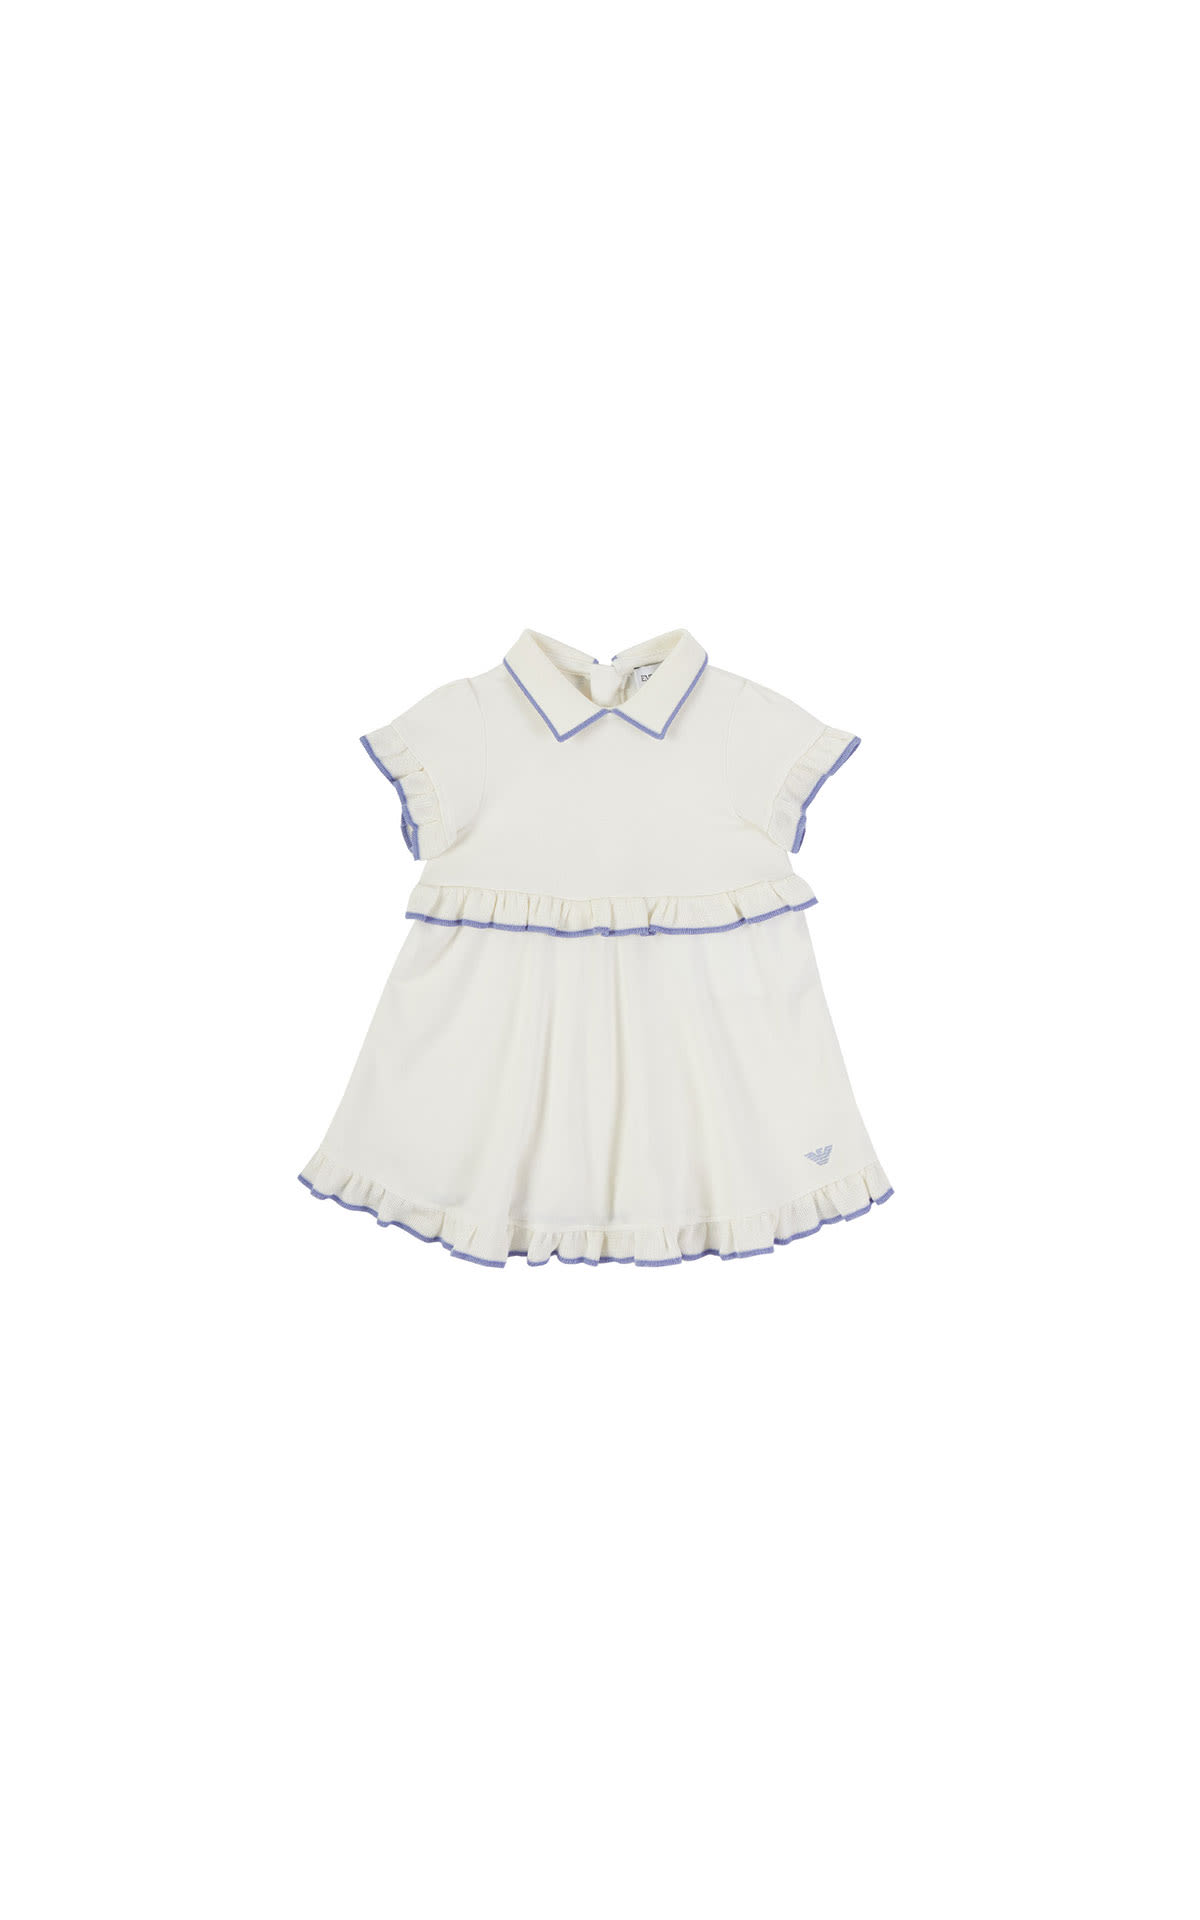 Armani Baby Dress from Bicester Village